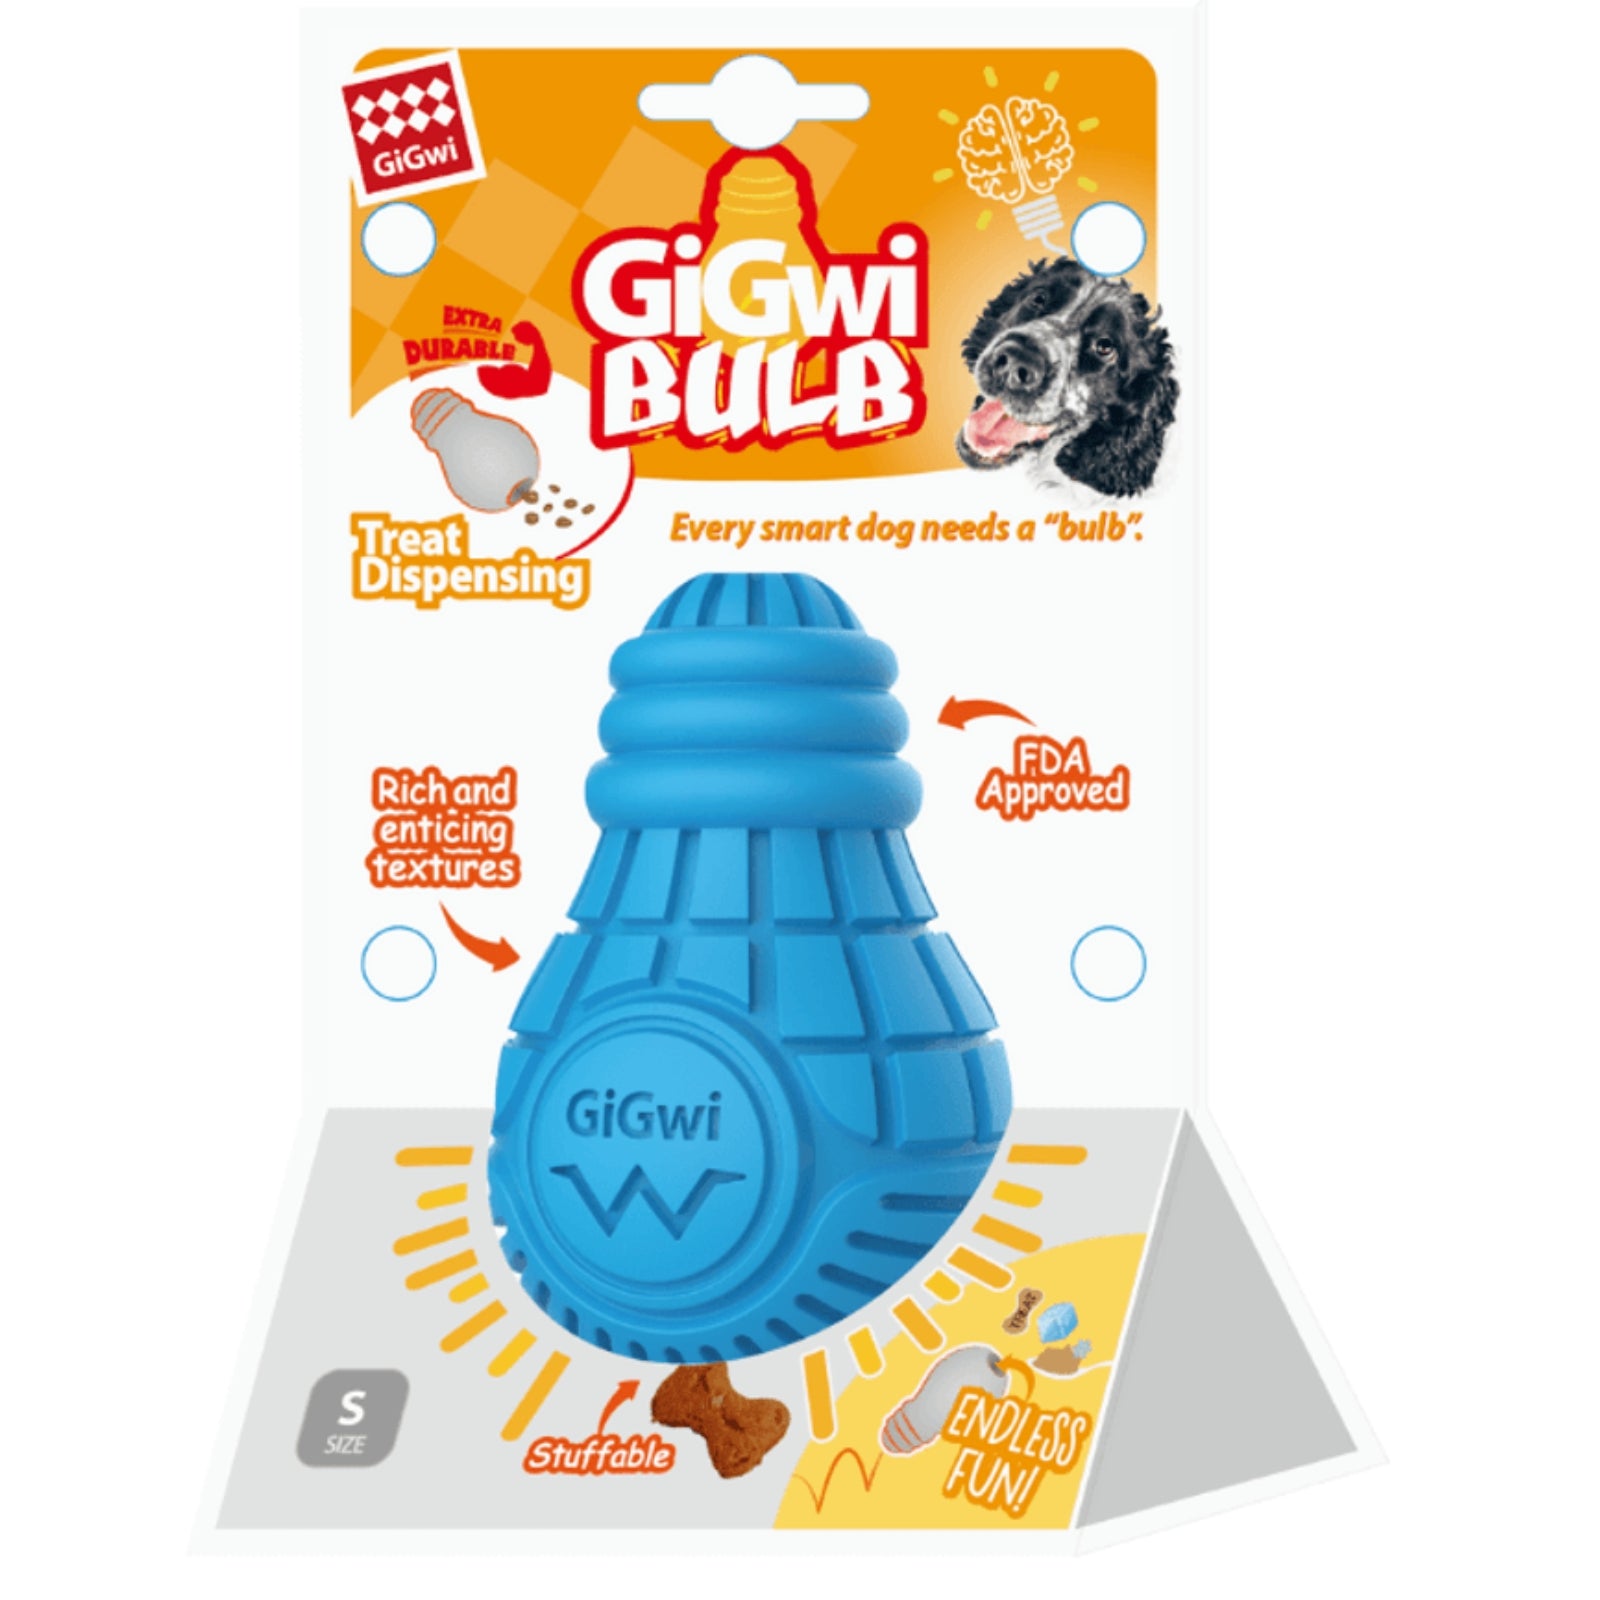 GIGWI Bulb Treat Dispensing Interactive Dog Toy - Small Blue